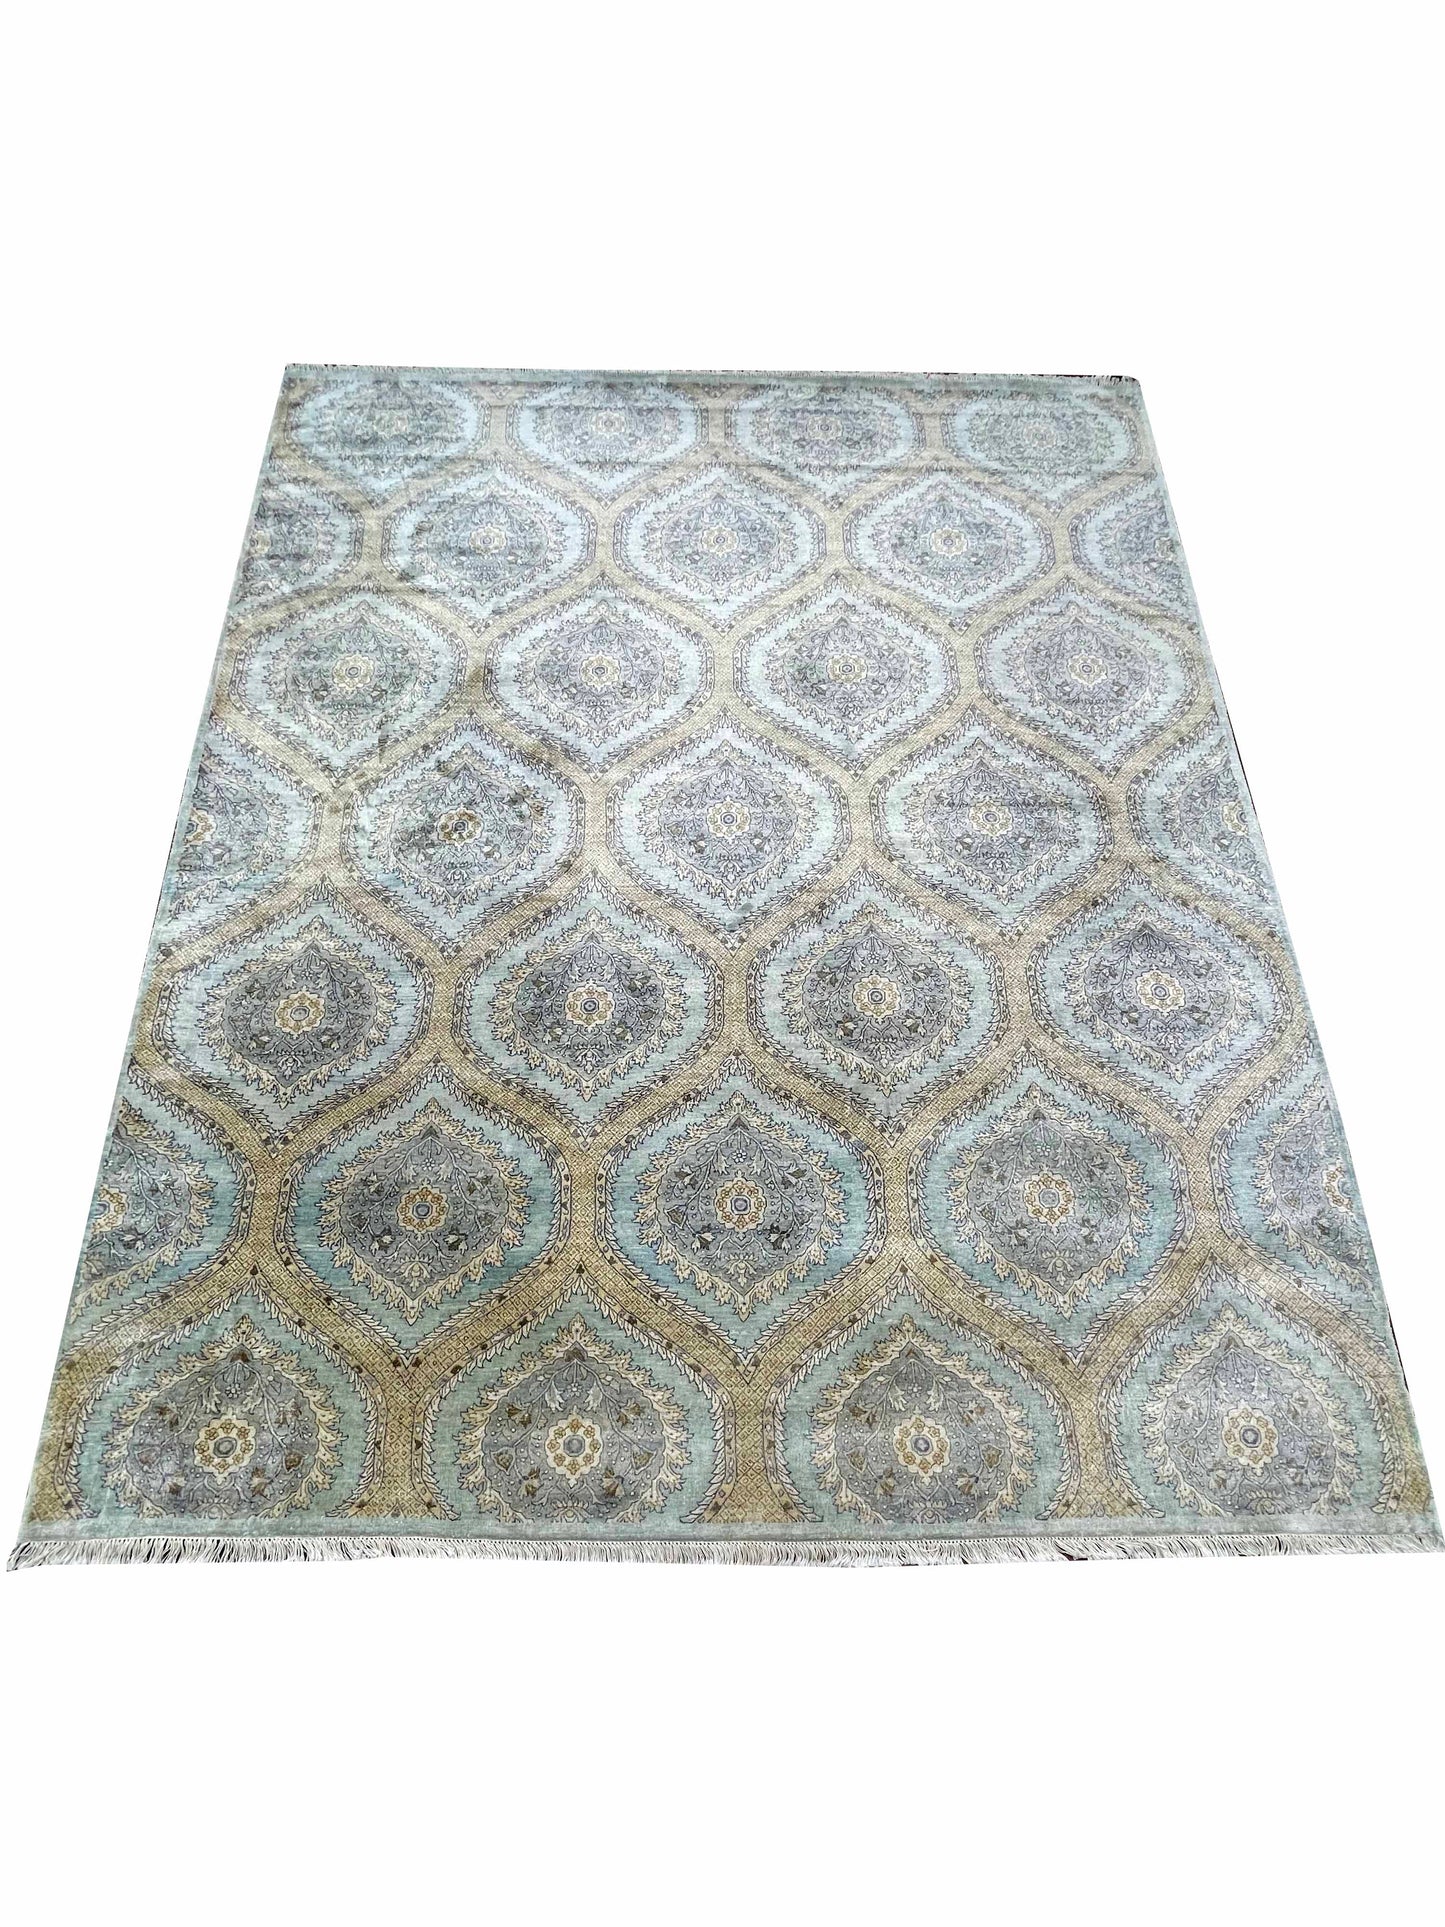 Get trendy with L.blue and Camel Pure Silk Ethnic Handknotted Area Rug  8.1x10.0ft 246x305cms - Traditional Rugs available at Jaipur Oriental Rugs. Grab yours for $5820.00 today!